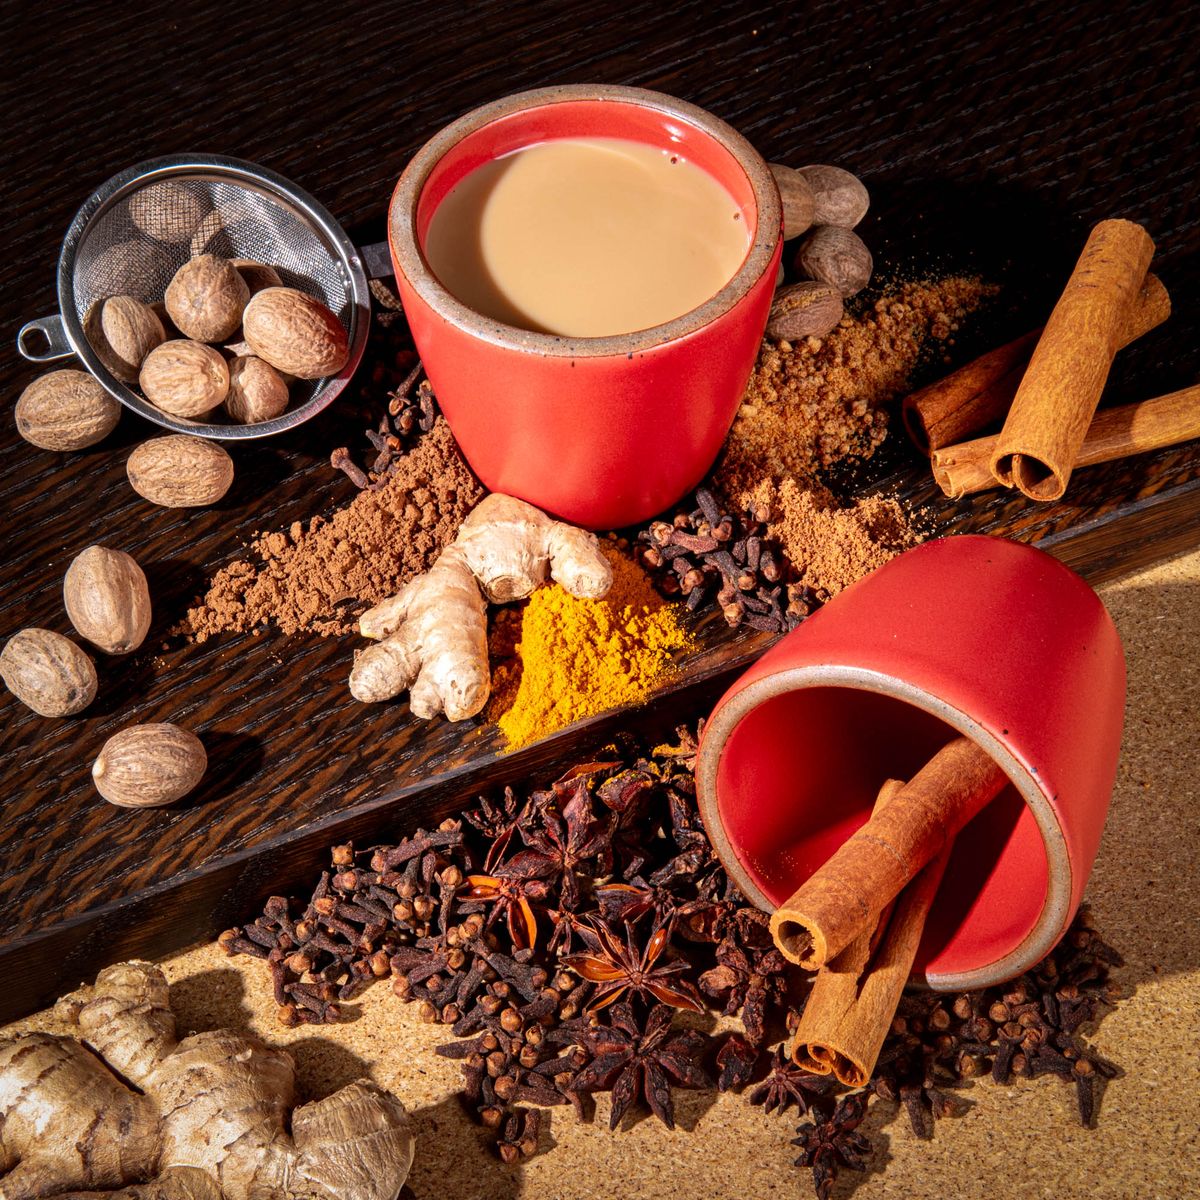 A short cup that tapers out to get wider at the top in a bold red color featuring iron speckles. The cup is filled with a buttered chai drink while another one is laying on its side holding cinnamon stick and surrounded by chai spices and a strainer. 